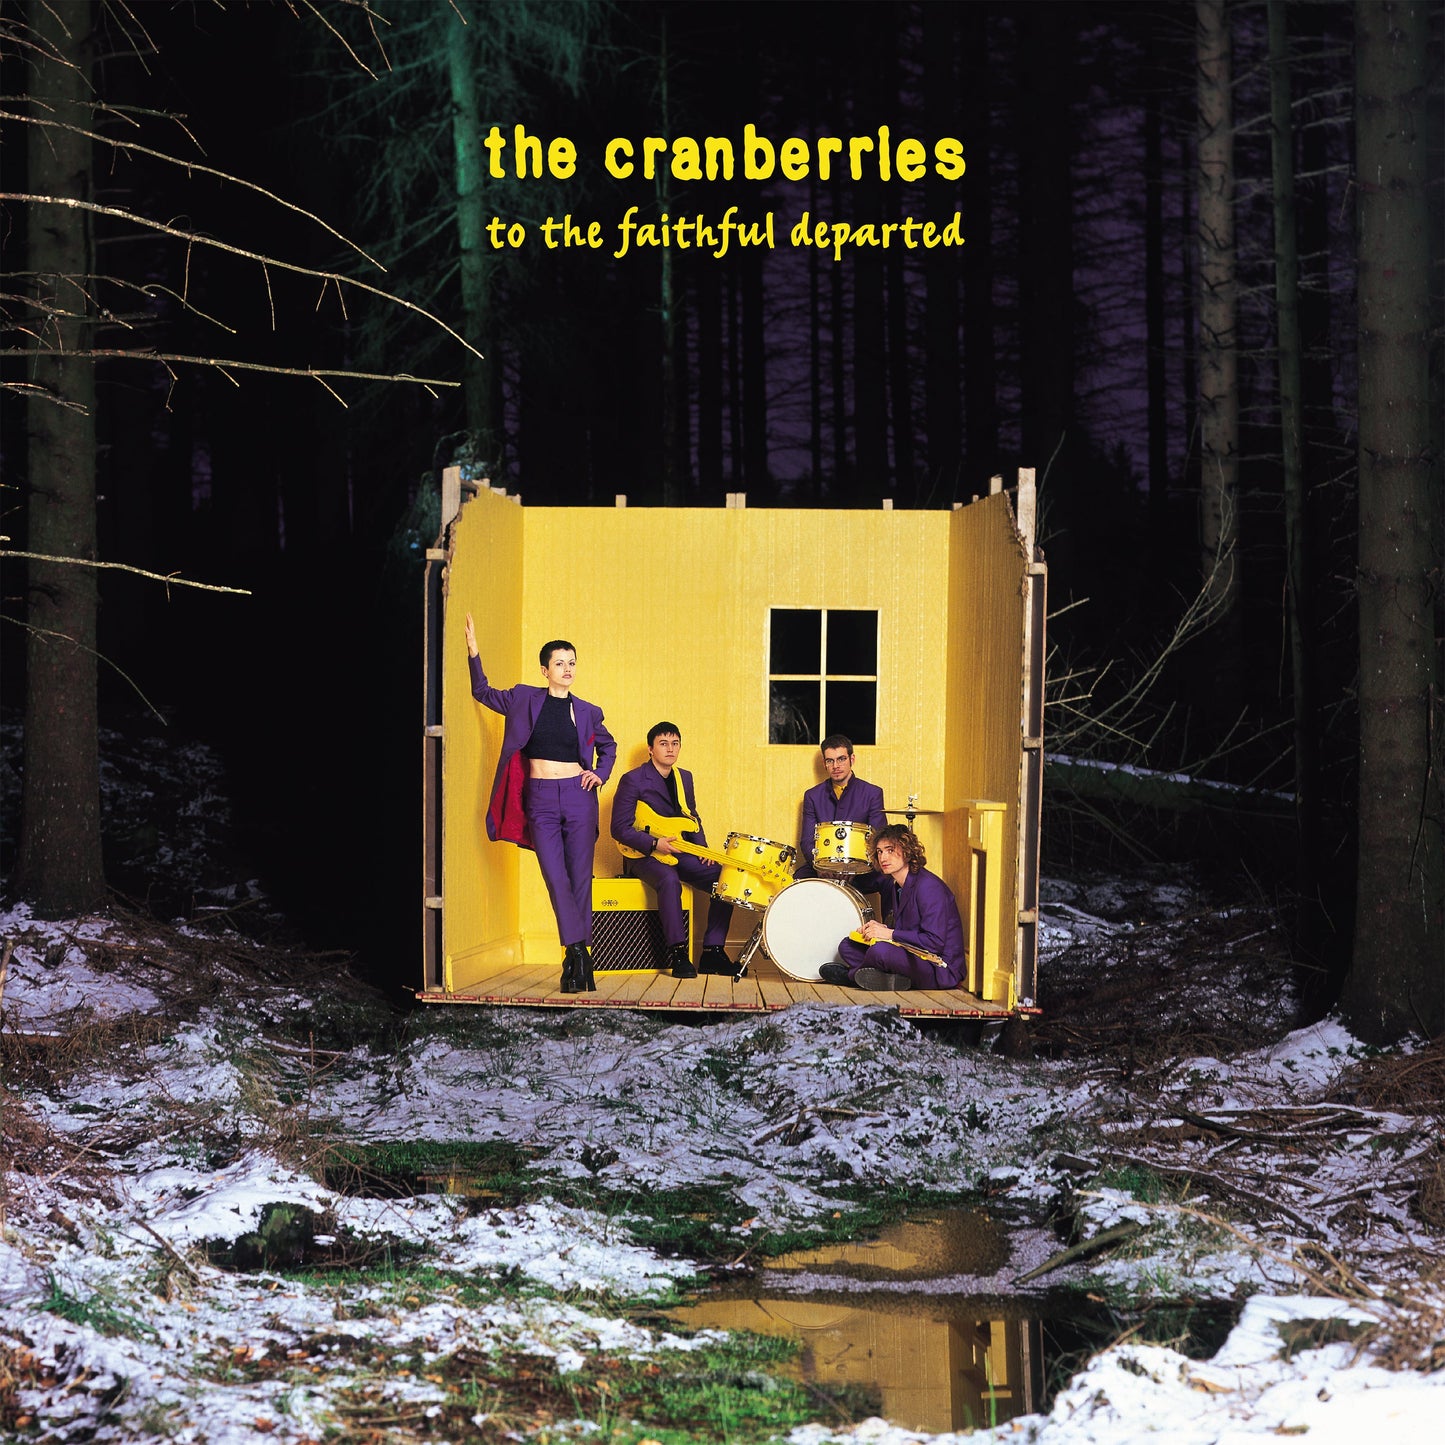 DAMAGED: The Cranberries "To The Faithful Departed" 2xLP